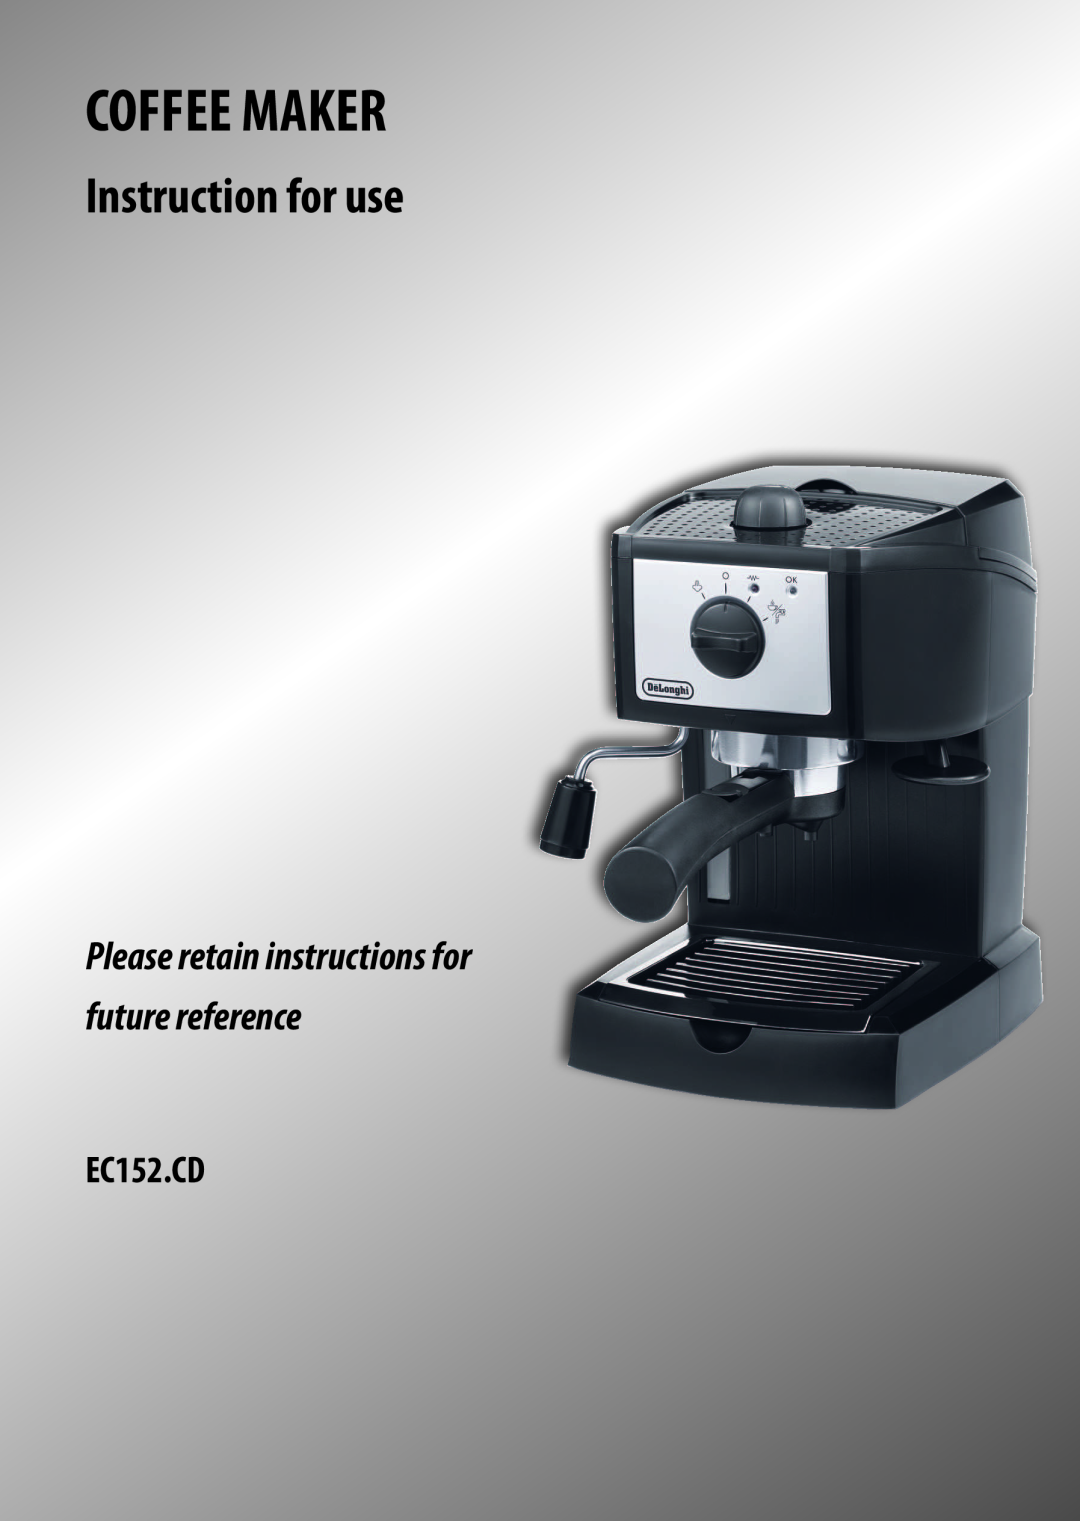 DeLonghi EC 152 CD manual Instruction for use, Coffee Maker, Please retain instructions for future reference, EC152.CD 